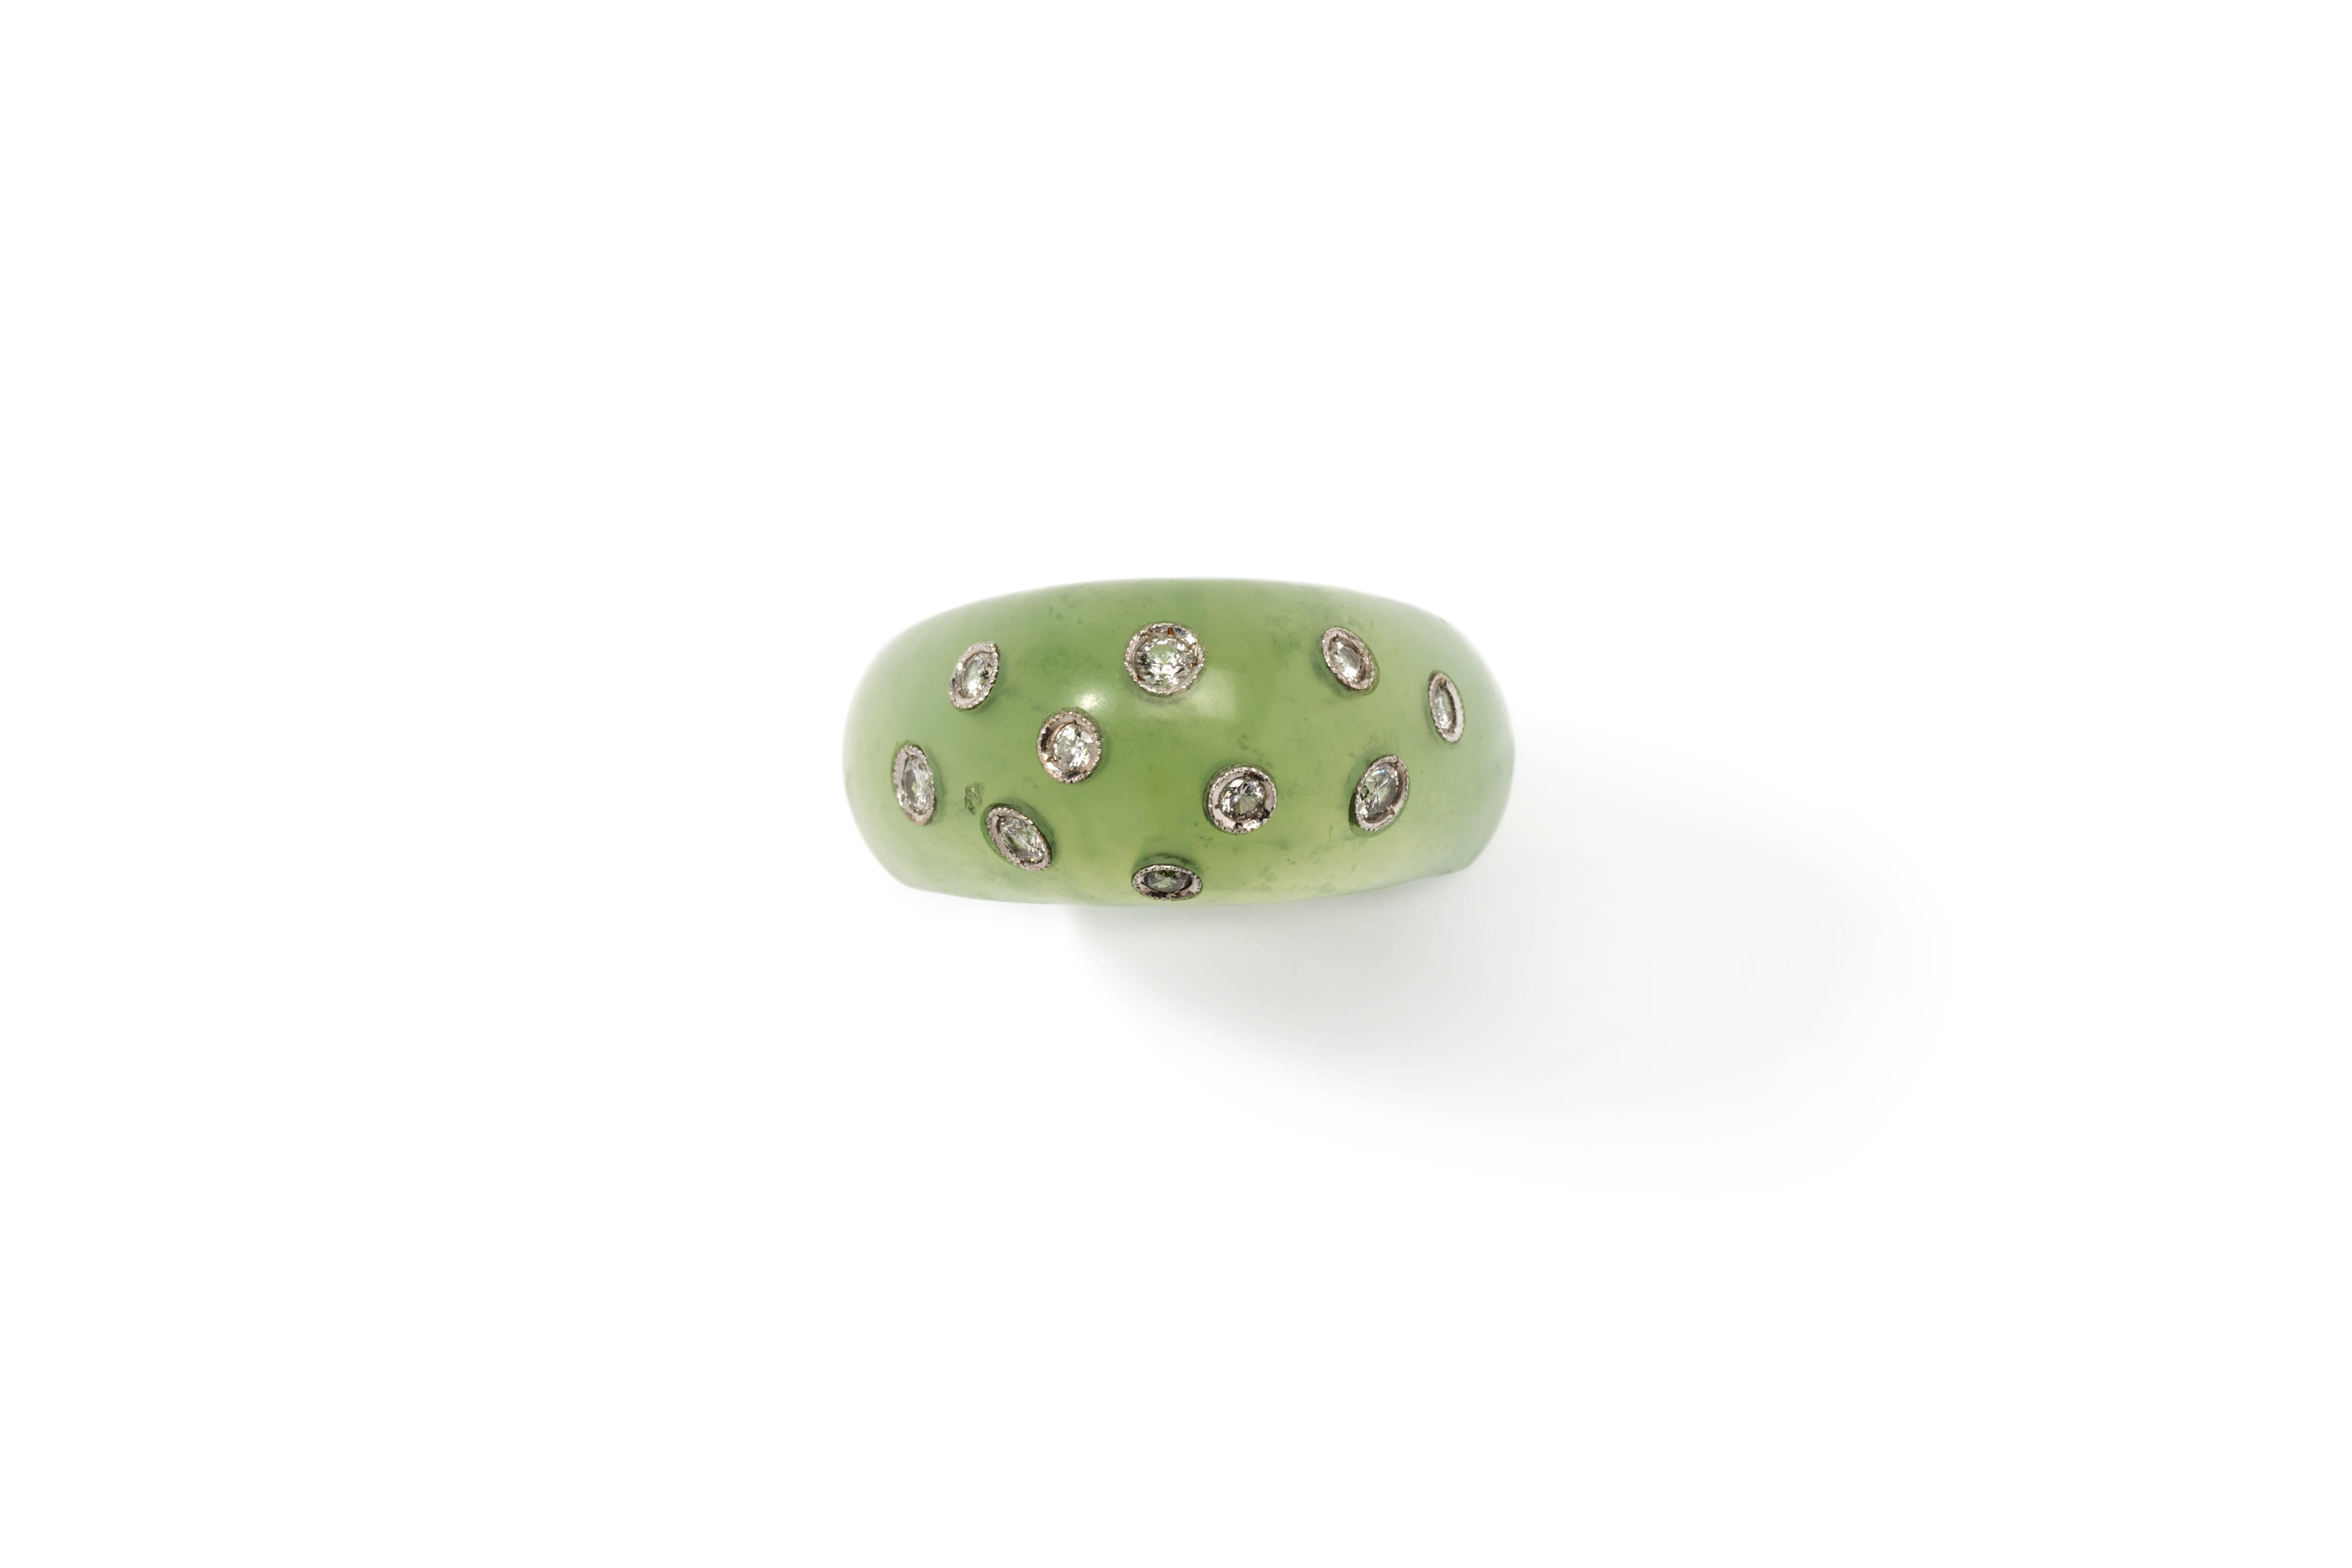 Italy, 1970s. Light green tone jade. Decorated by 10 brilliant-cut diamonds mounted in platinum with a total of ca. 0,40 ct. Millegrain setting. 
Total weight: 7,85 grams. Height: ca. 0.39 in ( 1 cm ), Width: 0.51 in ( 1,3 cm ). Ring size: 59 ( US